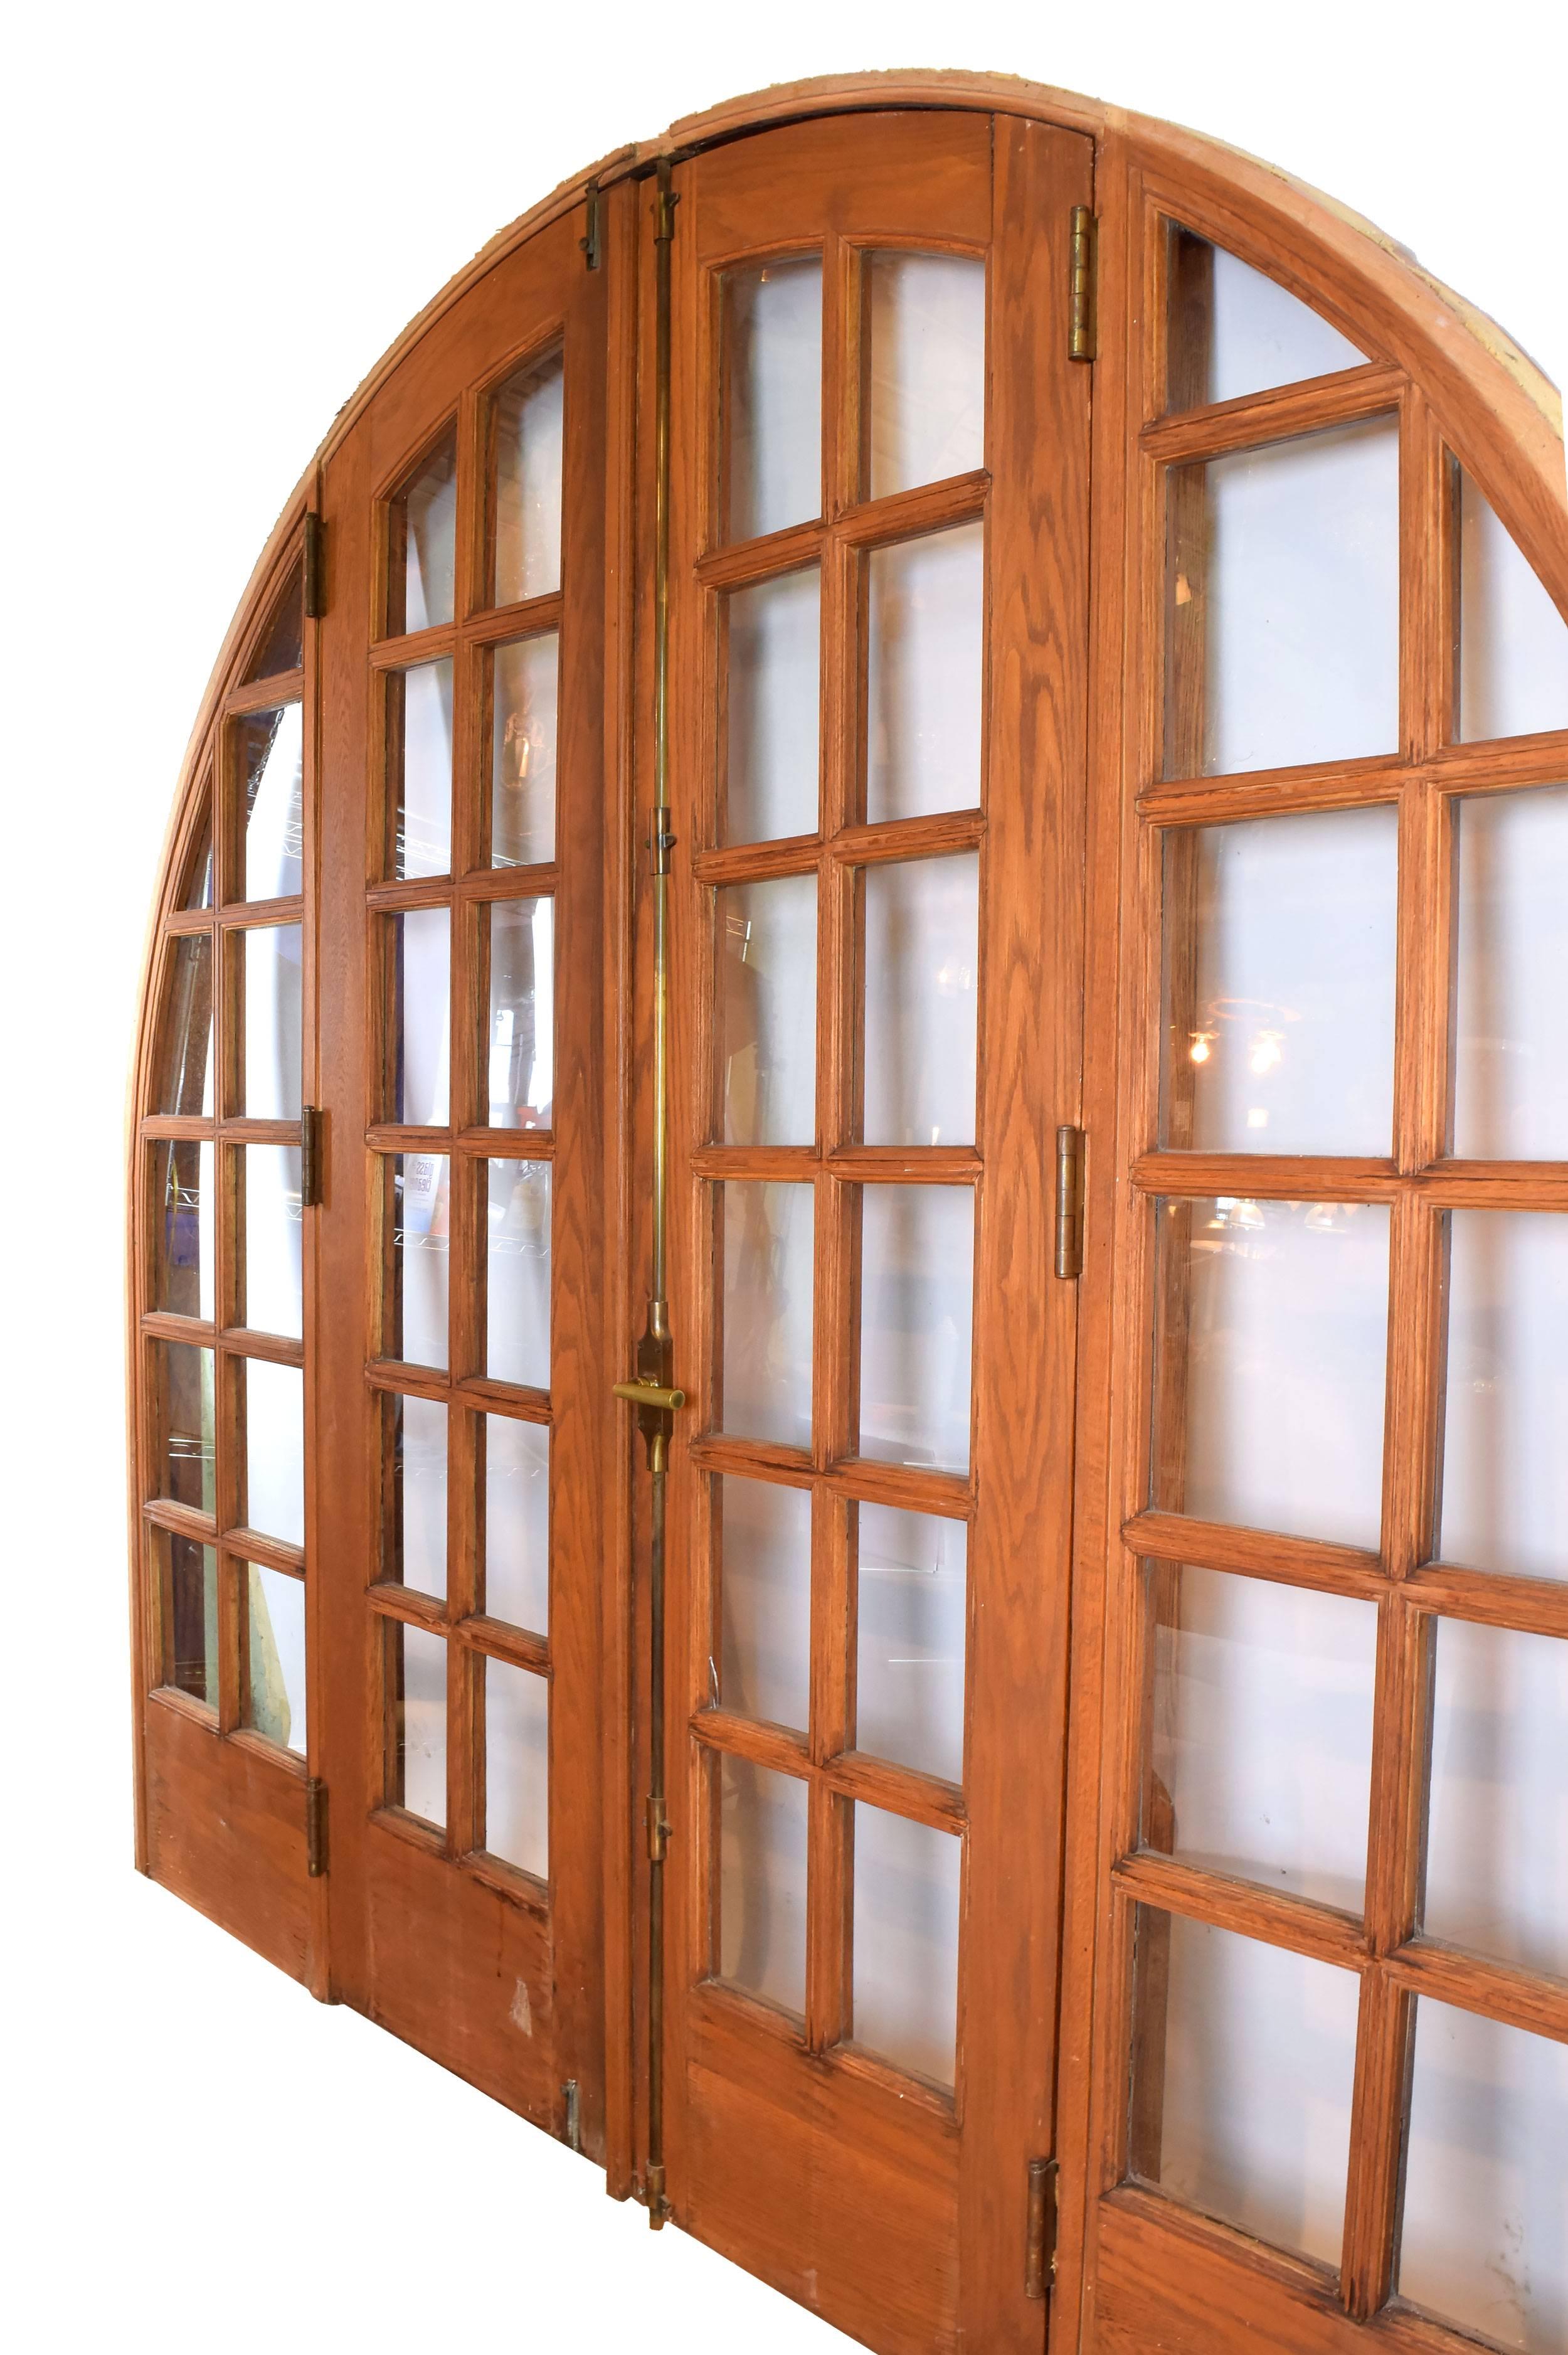 This arched oak door unit would make an impressive focal point in any room, whose elegant curving edges are juxtaposed beautifully with geometric latticework throughout. Another wonderful feature of this piece is the Cremone bolt, which runs